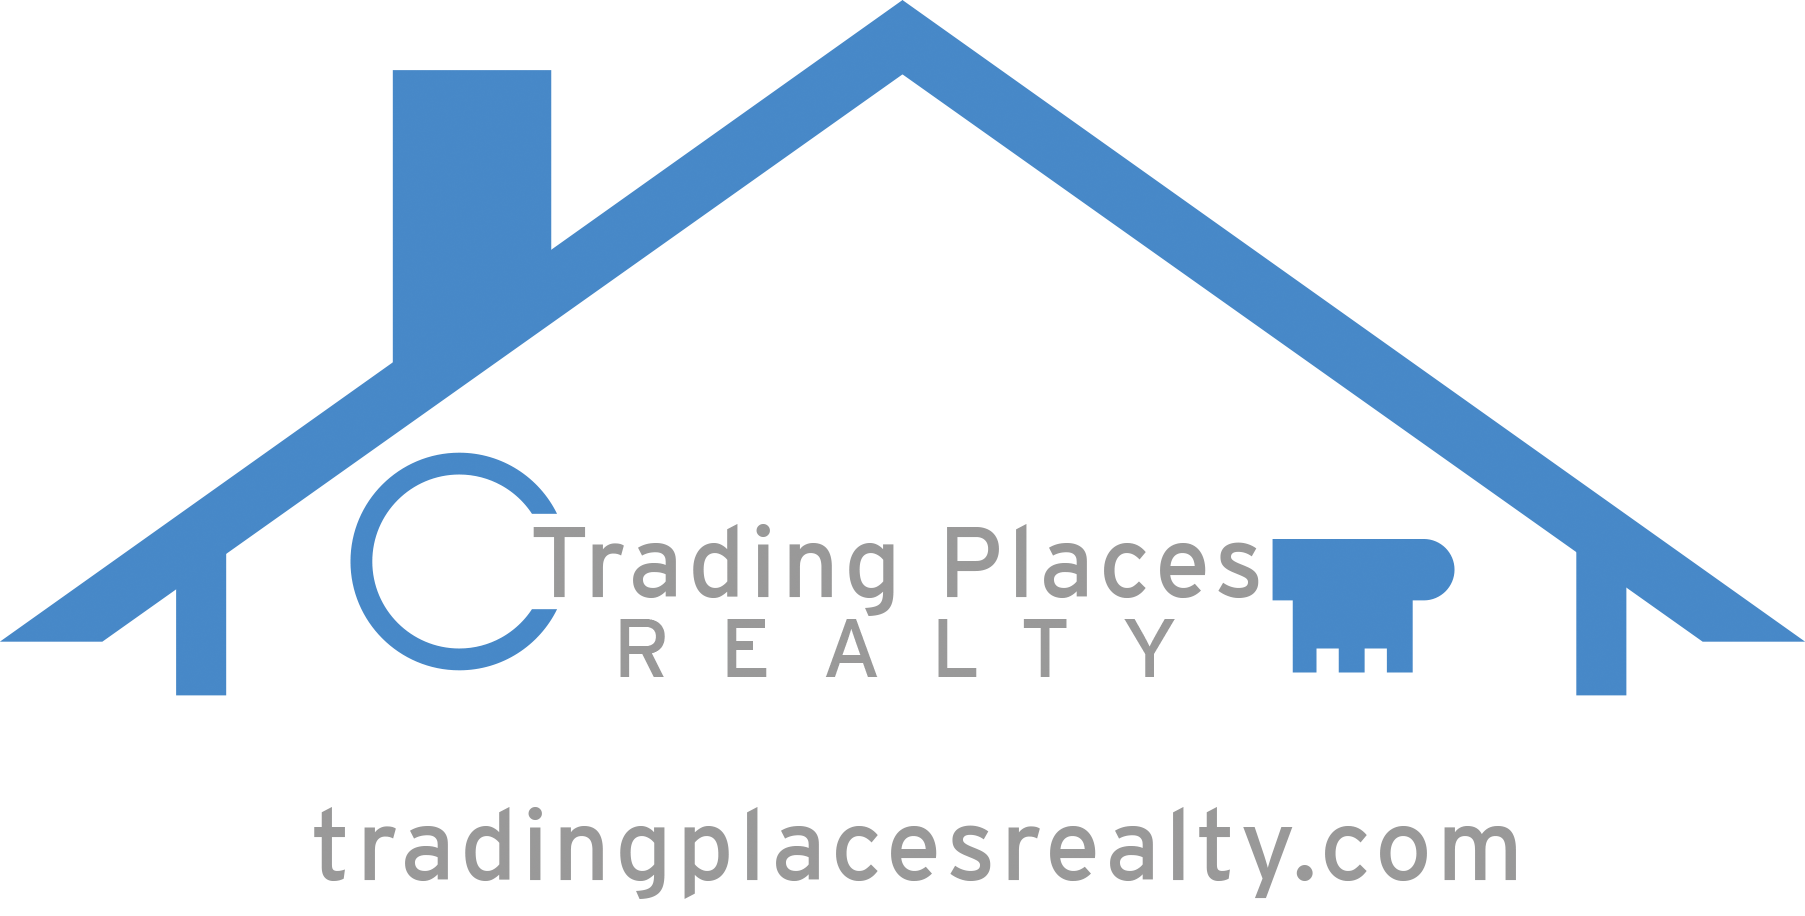 Trading Places Realty